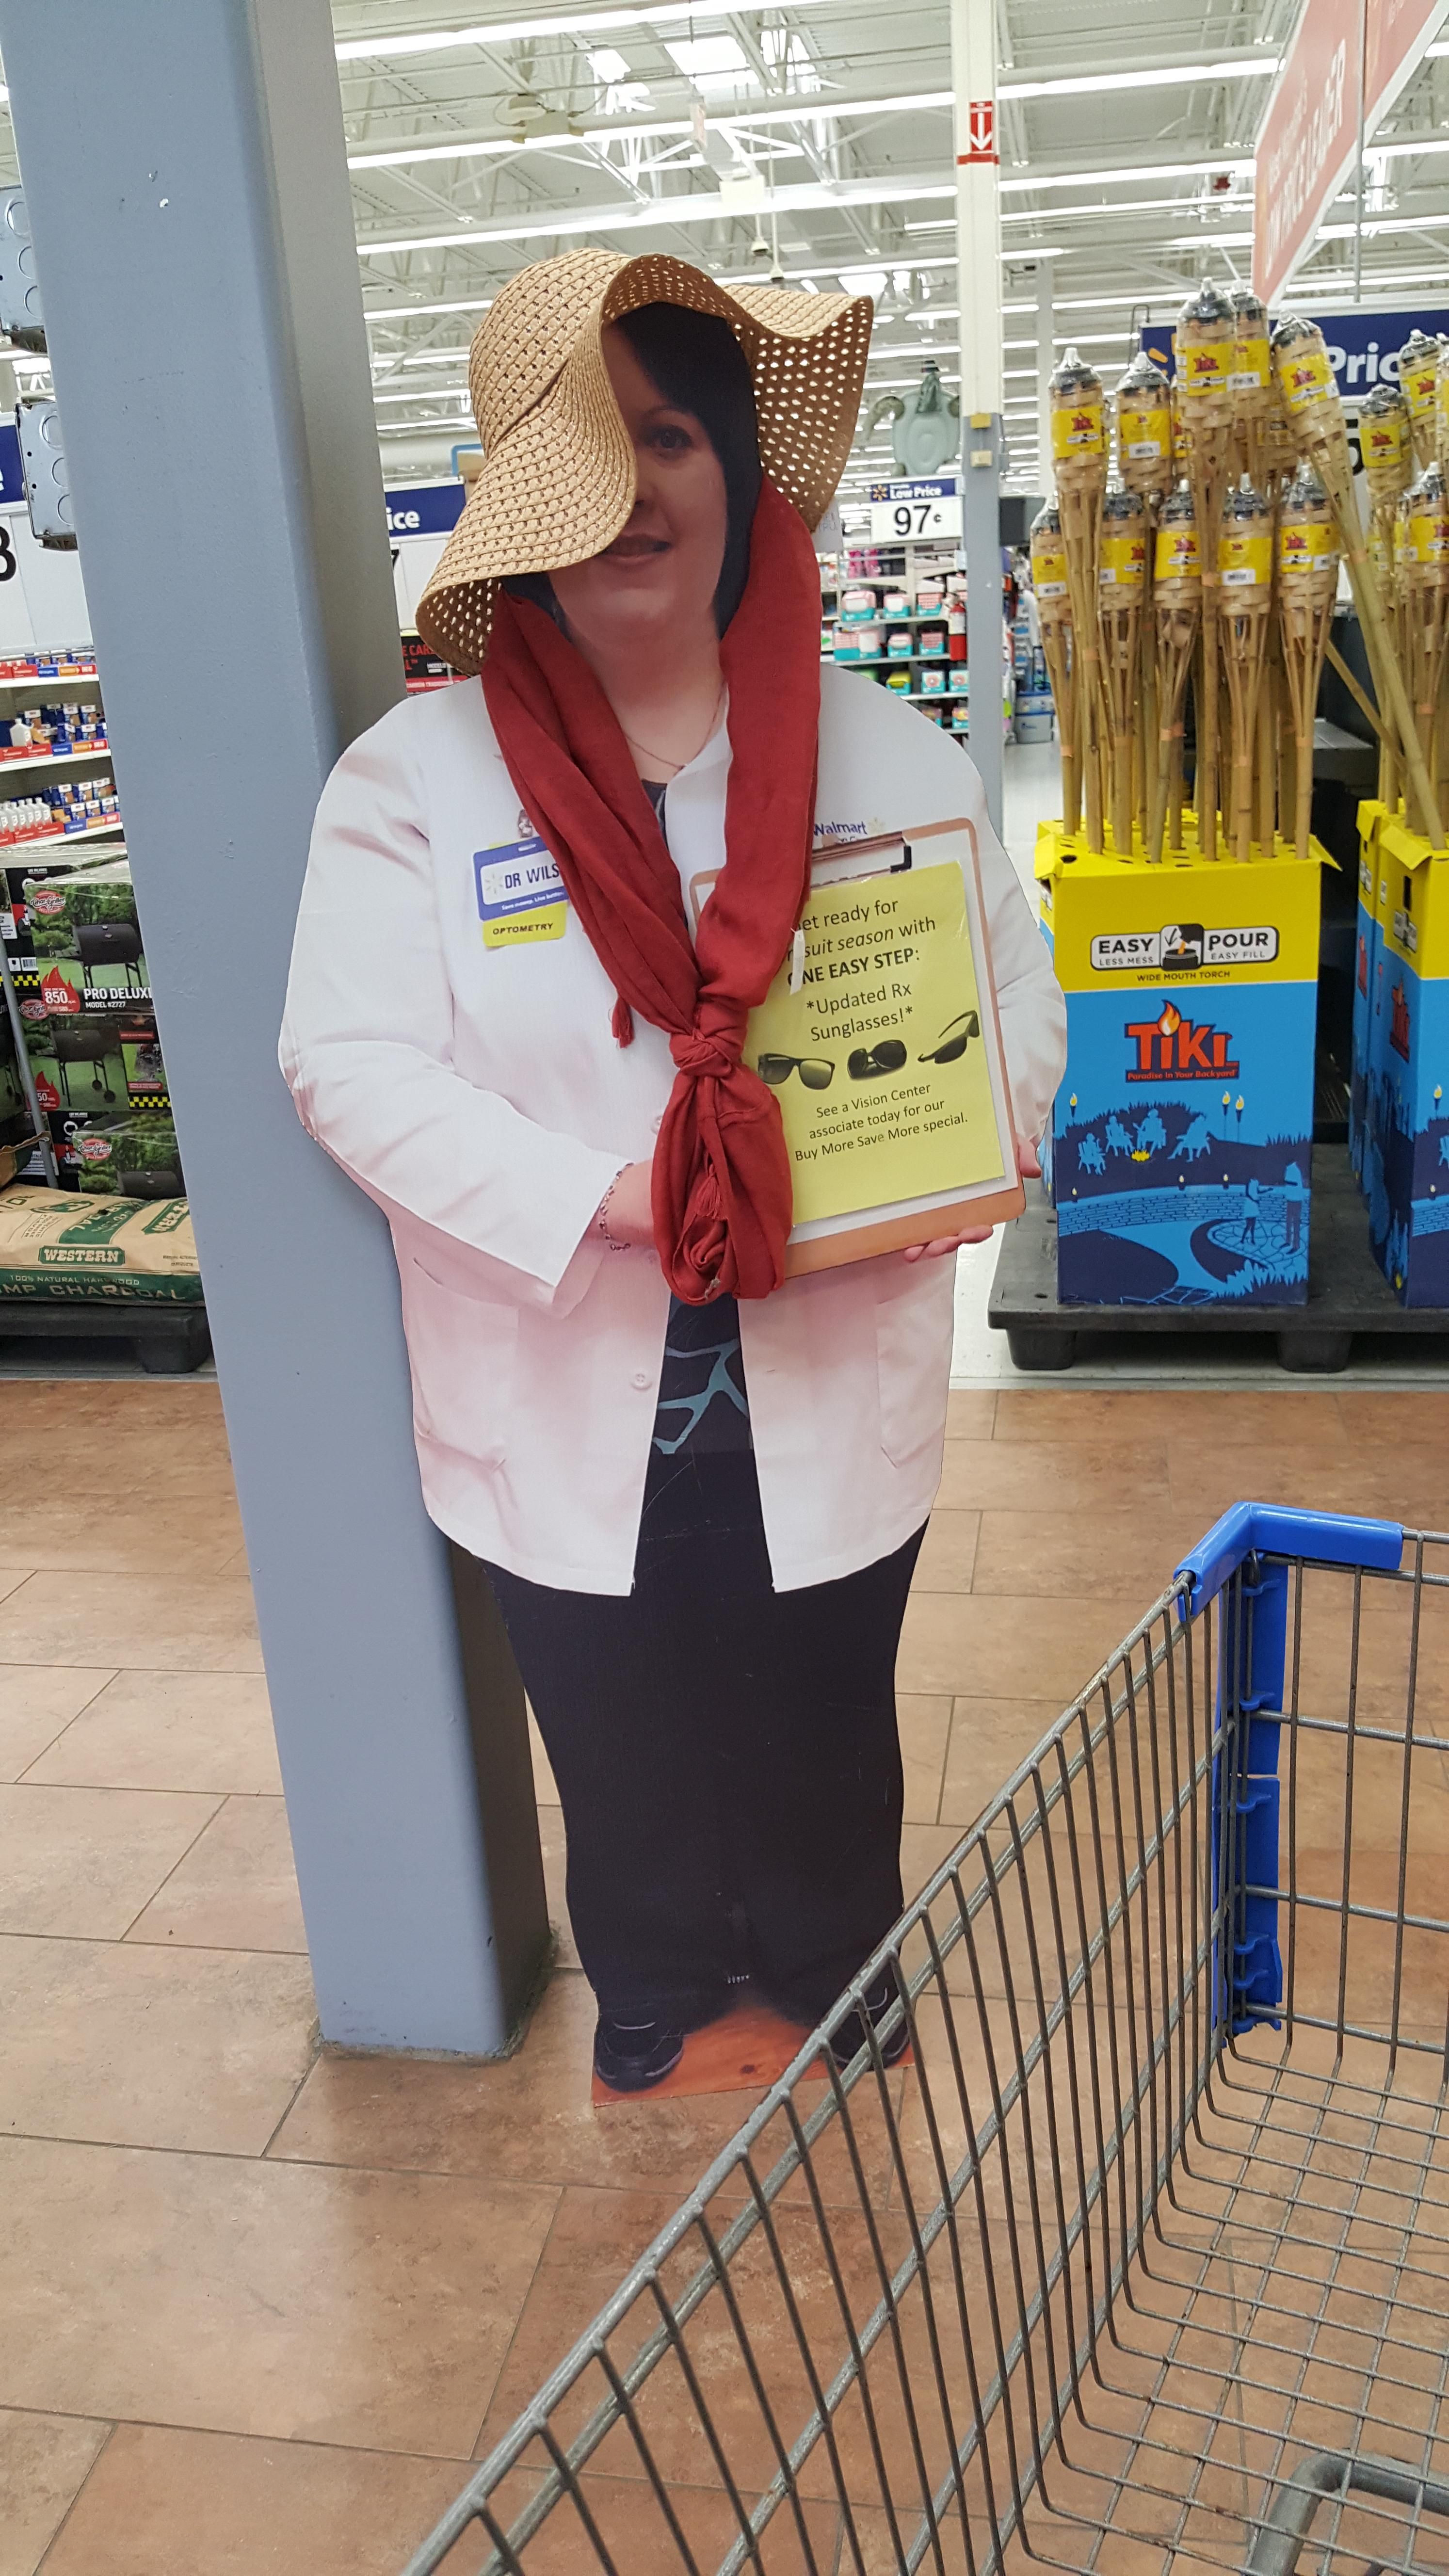 I just said hi to this card board cut out. I hate Wal-Mart.